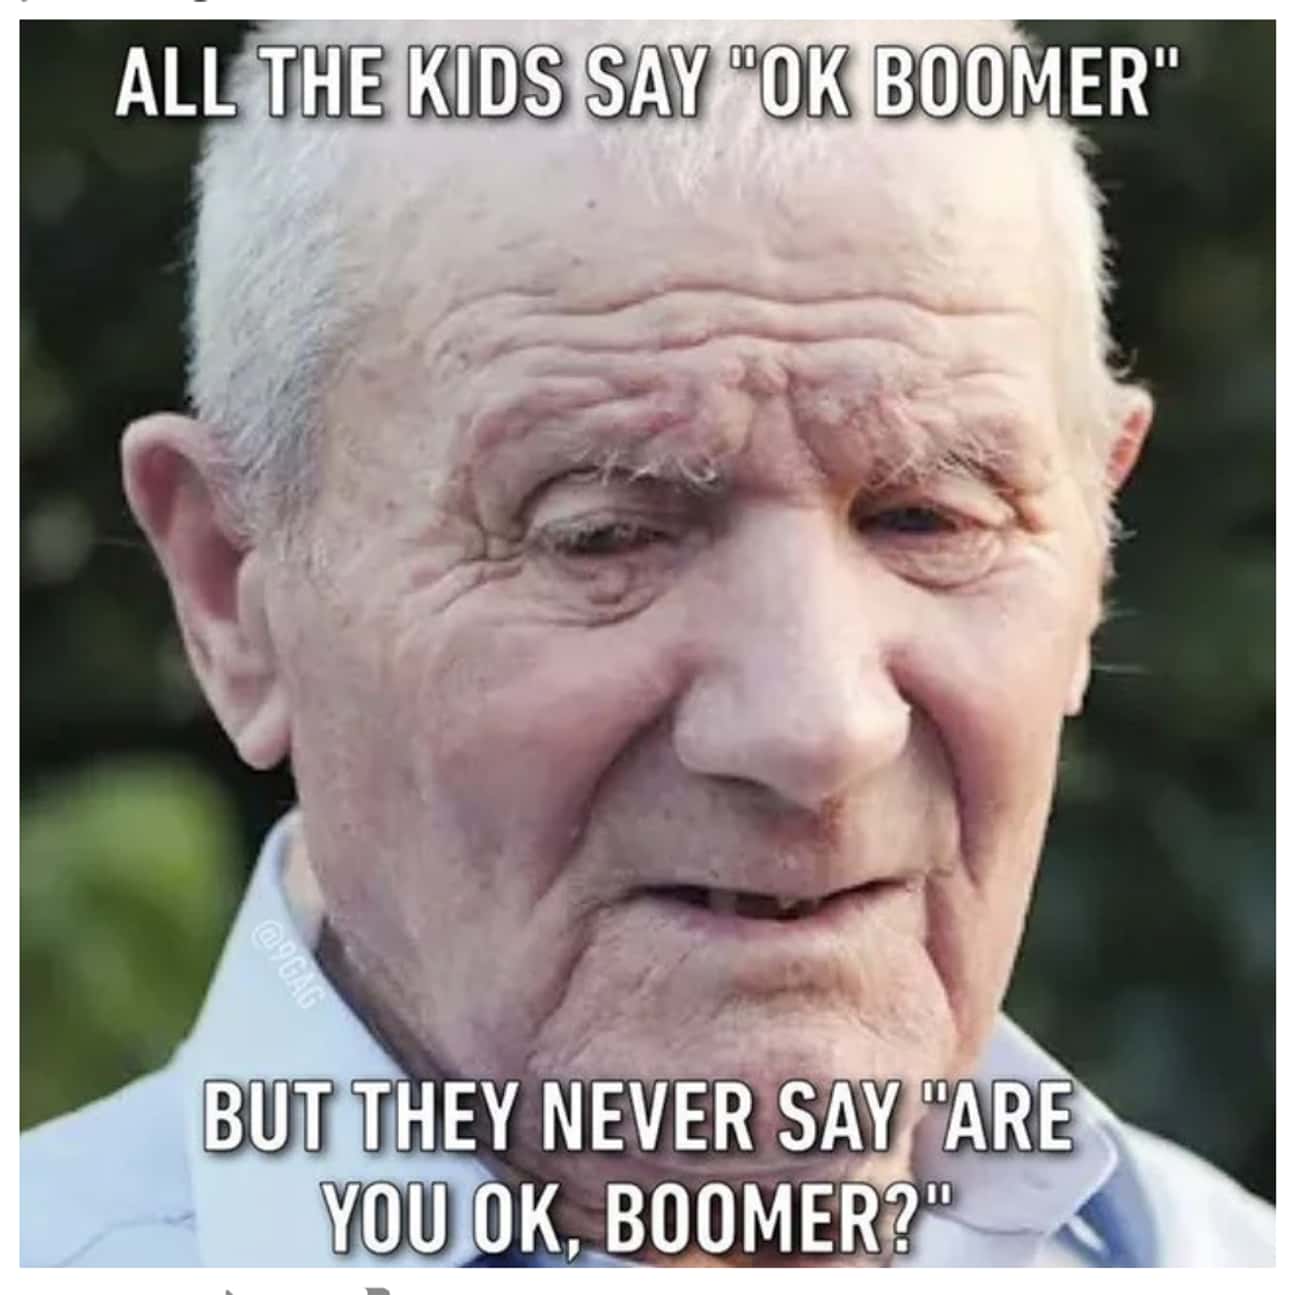 19 Funny 'OK Boomer' Memes To Fuel The War Between Boomers And Millennials